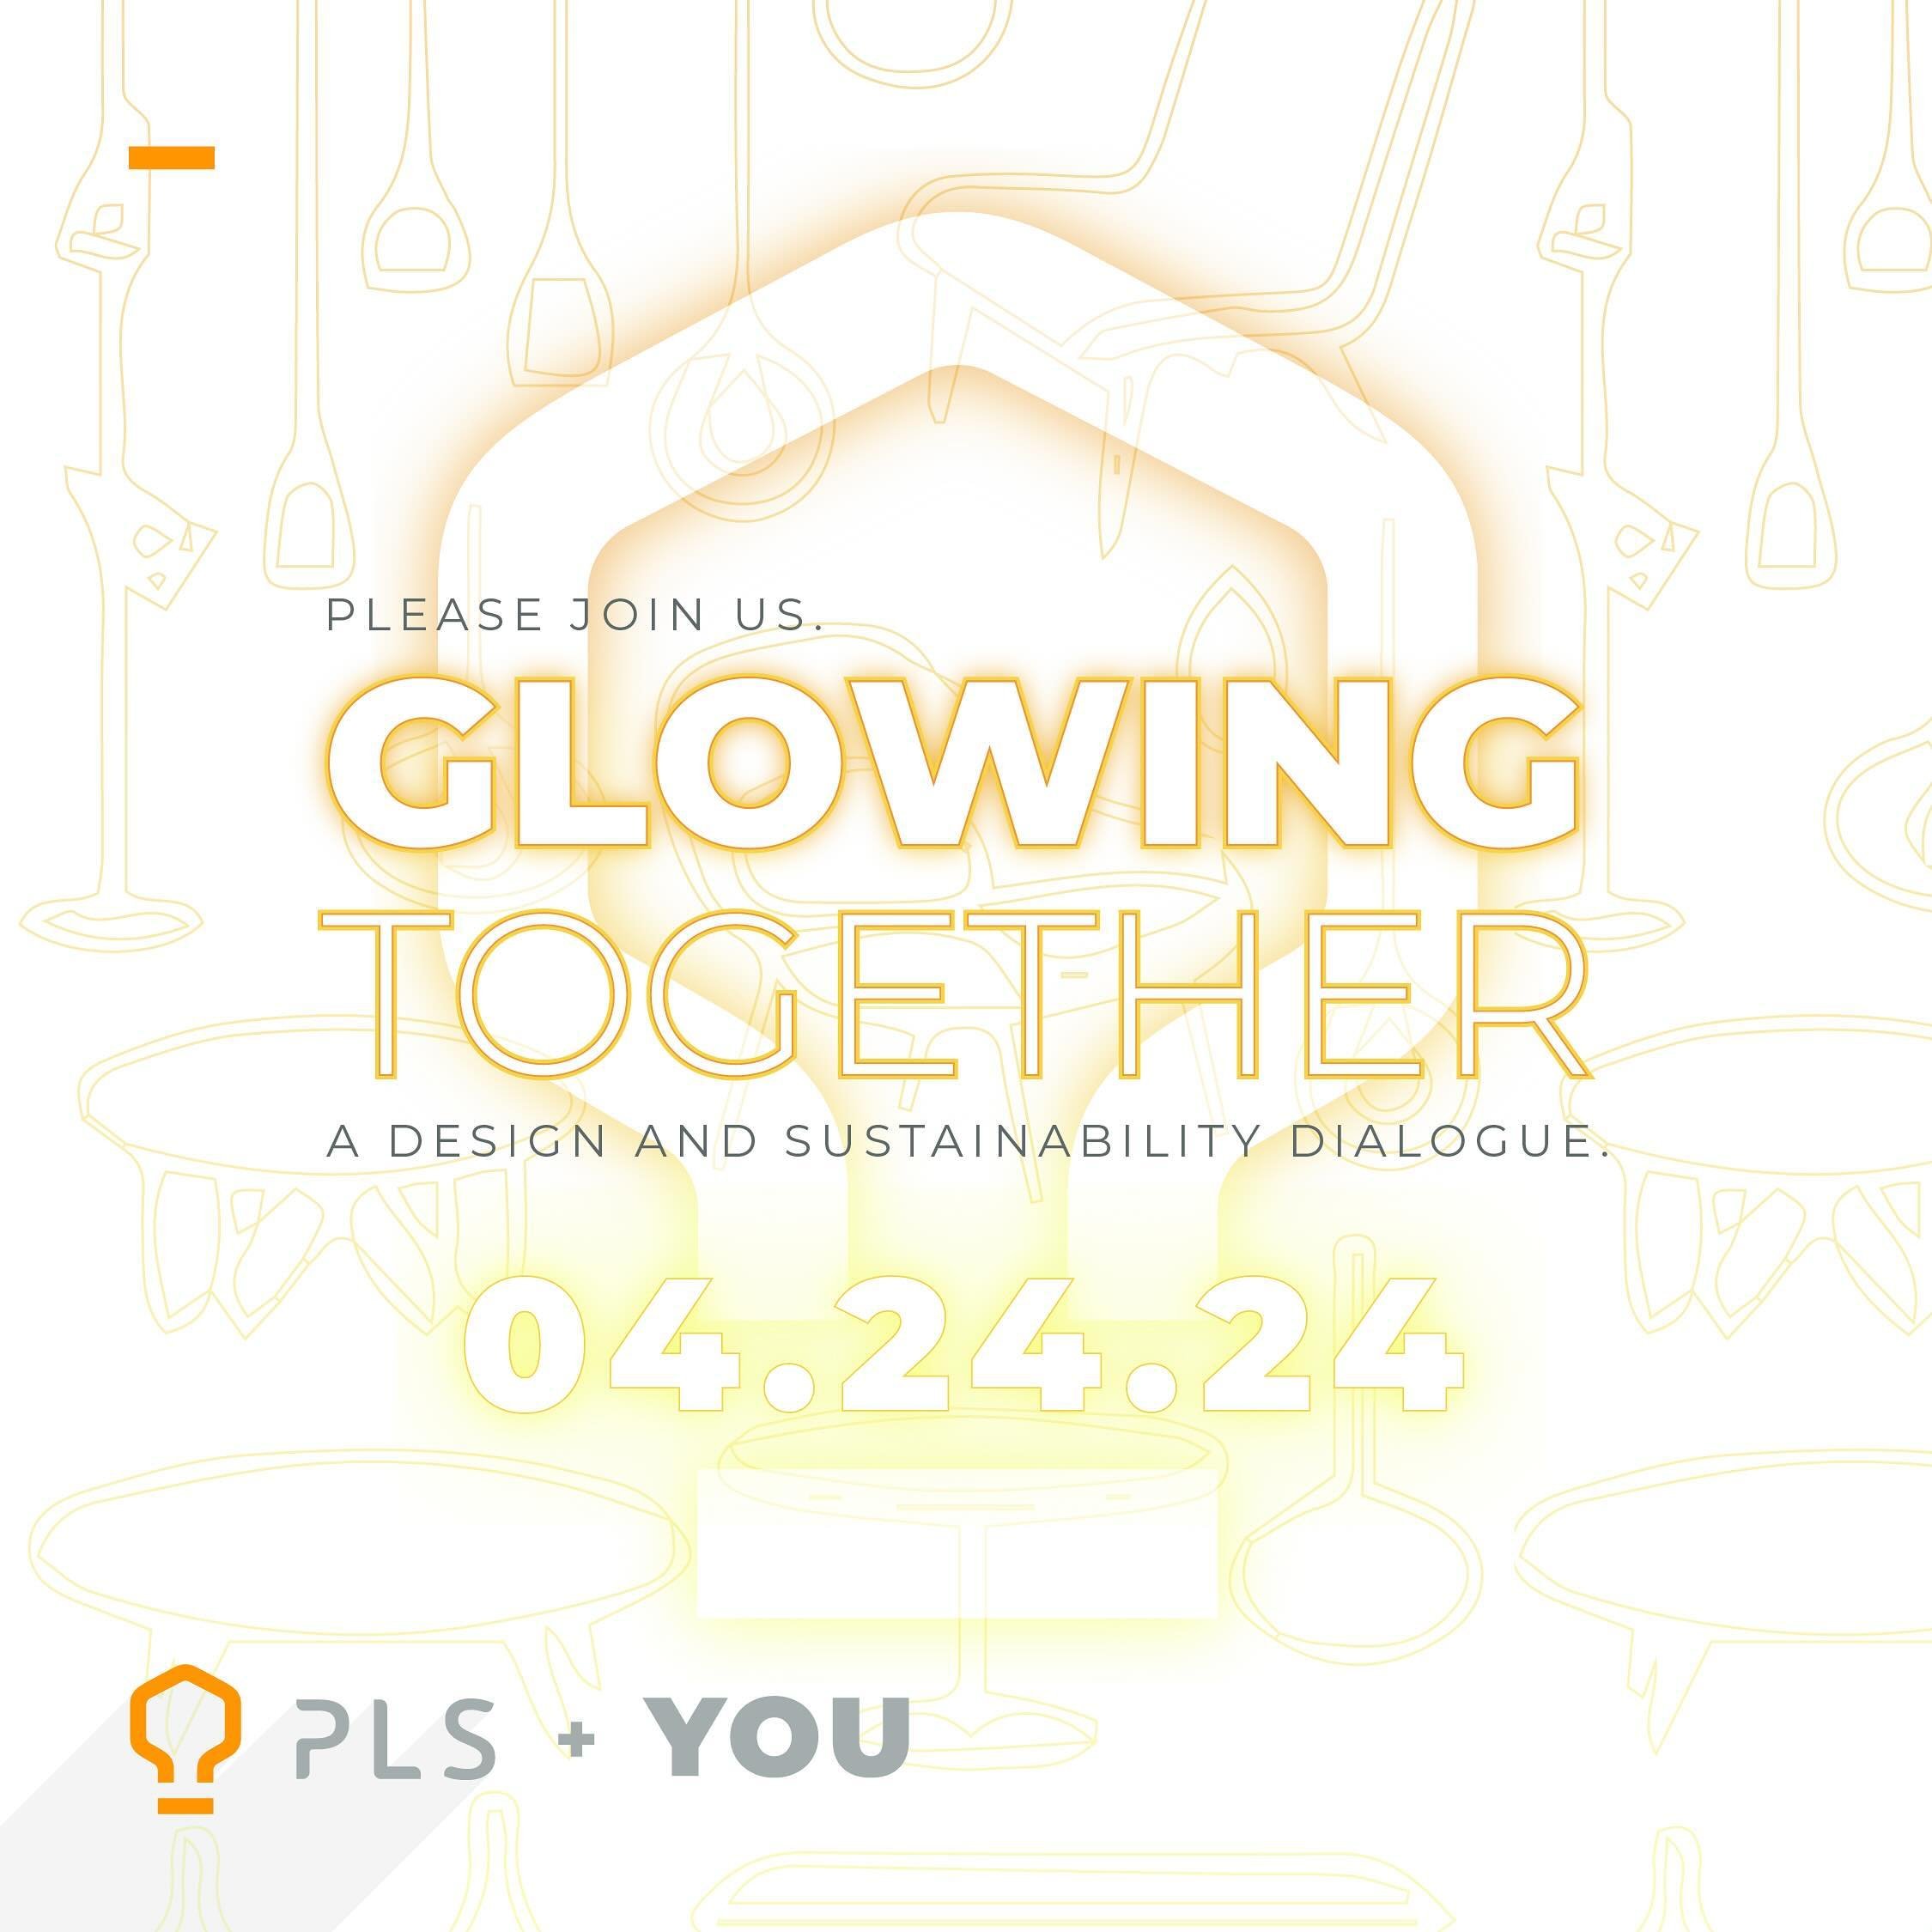 PLS |  GLOWING TOGETHER | 04.24.24

A DESIGN AND SUSTAINABILITY DIALOGUE

The intent of the event is to bring together the local A&amp;D community to showcase commercial interior elements with a focus on blending the overall sustainability conversati